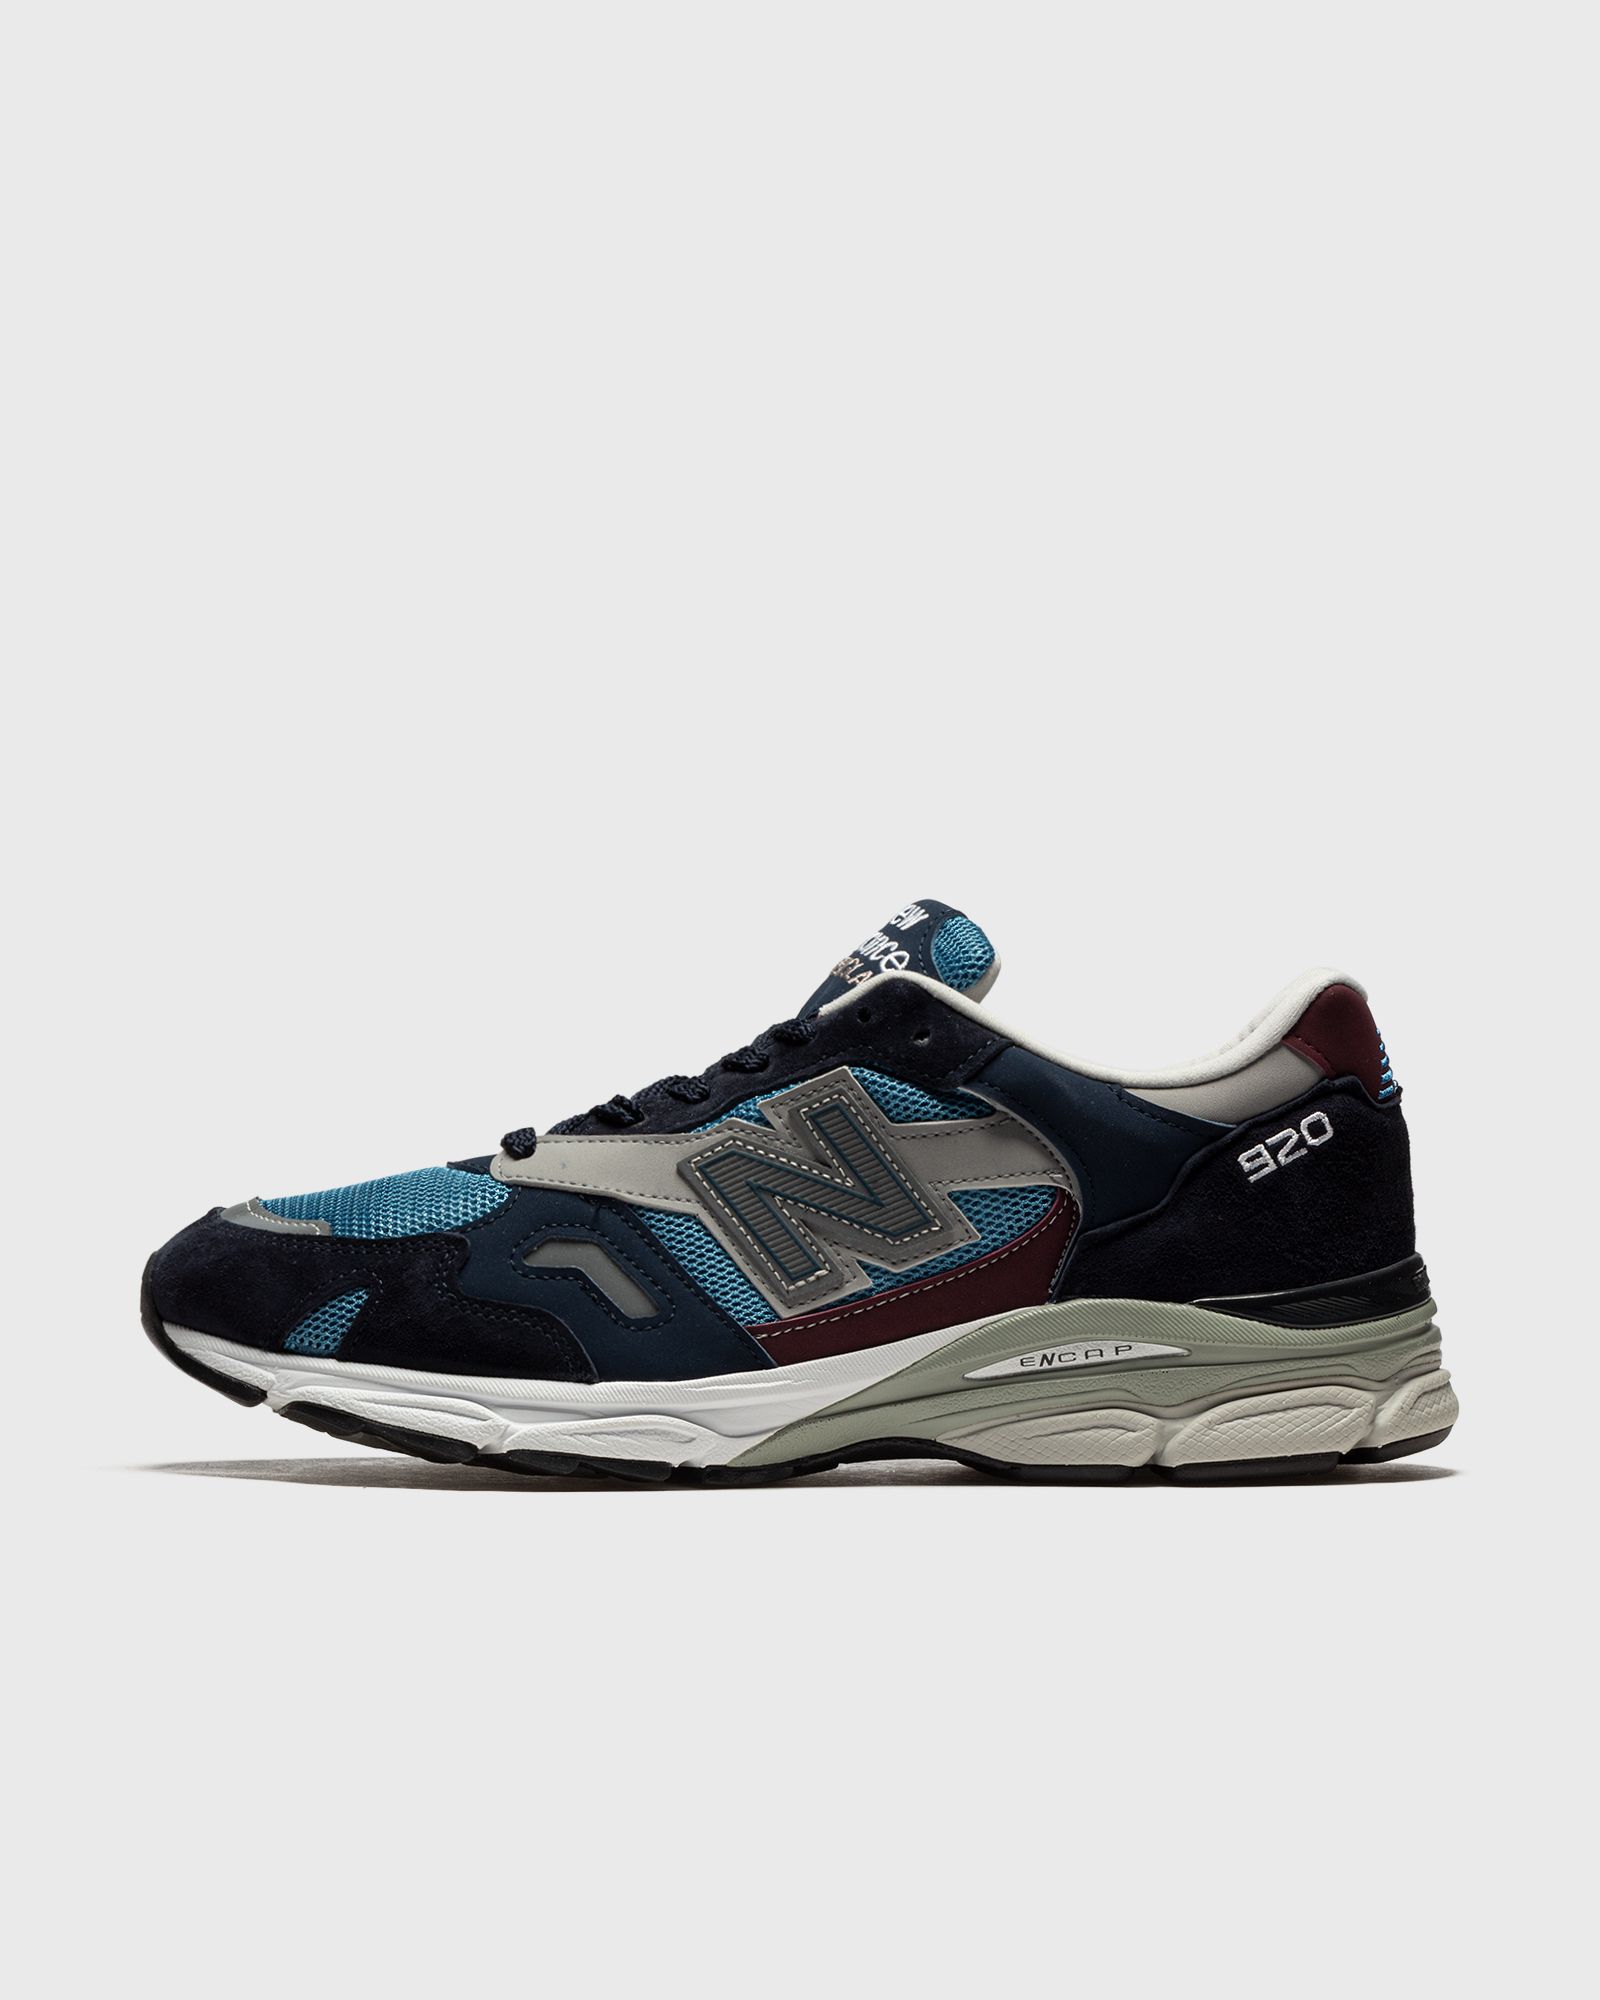 New Balance 920 'MADE IN UK' NAVY men Sneakers now available at BSTN in ...